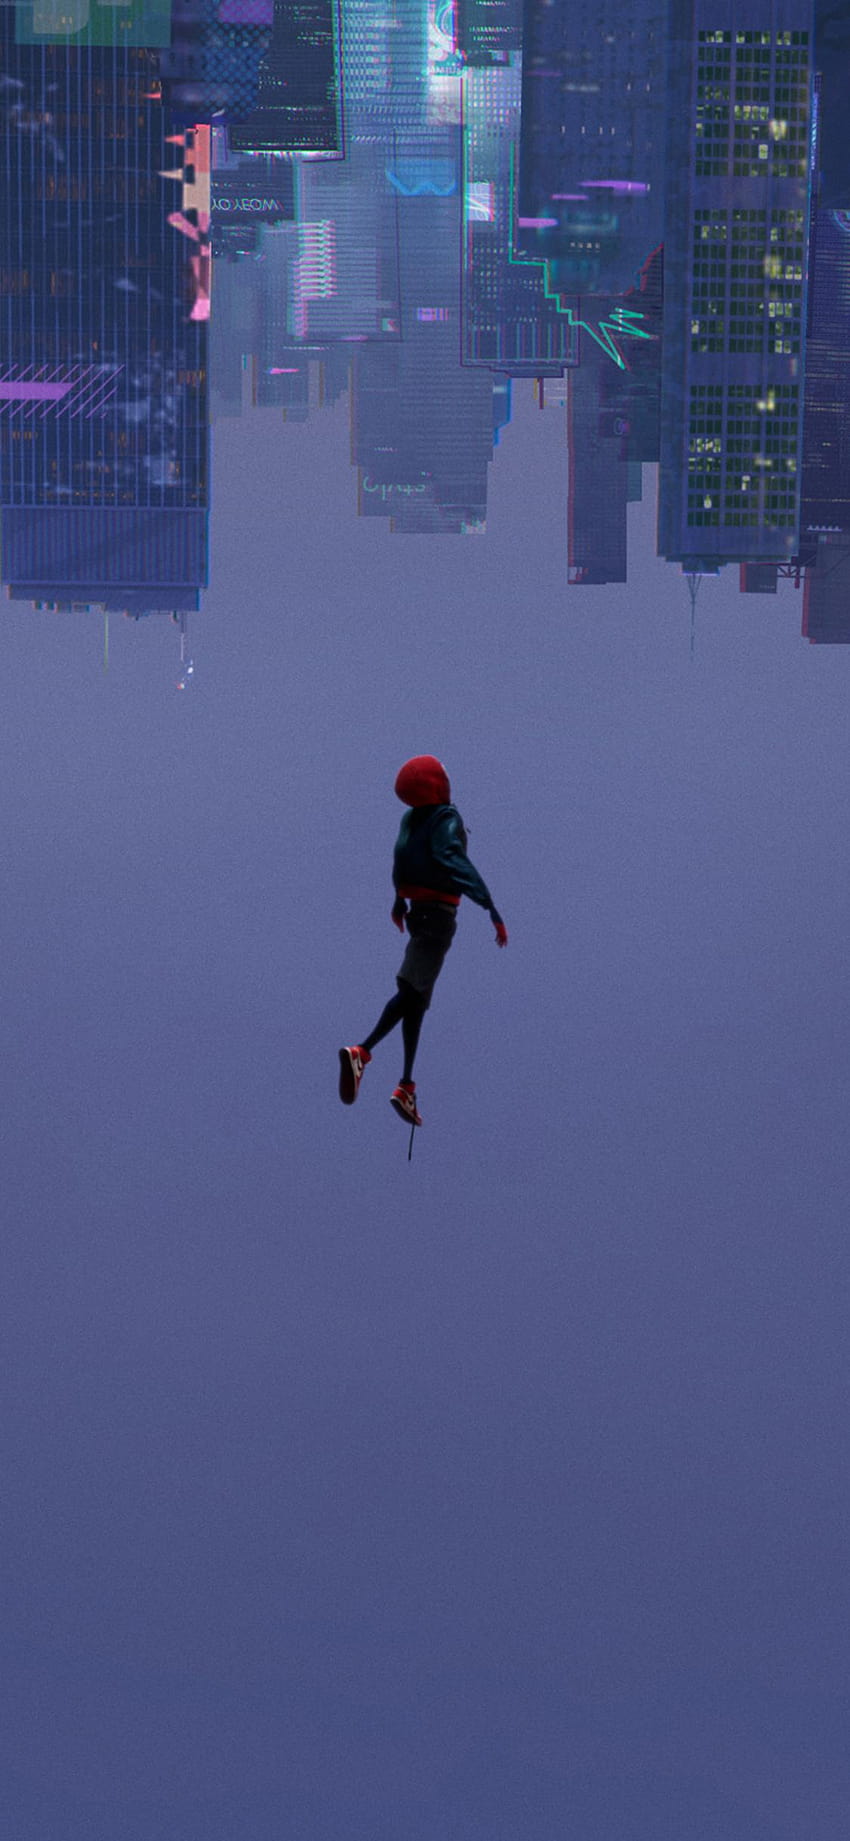 1125x2436 Film SpiderMan Into The Spider Verse 2018 Iphone XS, spider man iphone xr wallpaper ponsel HD